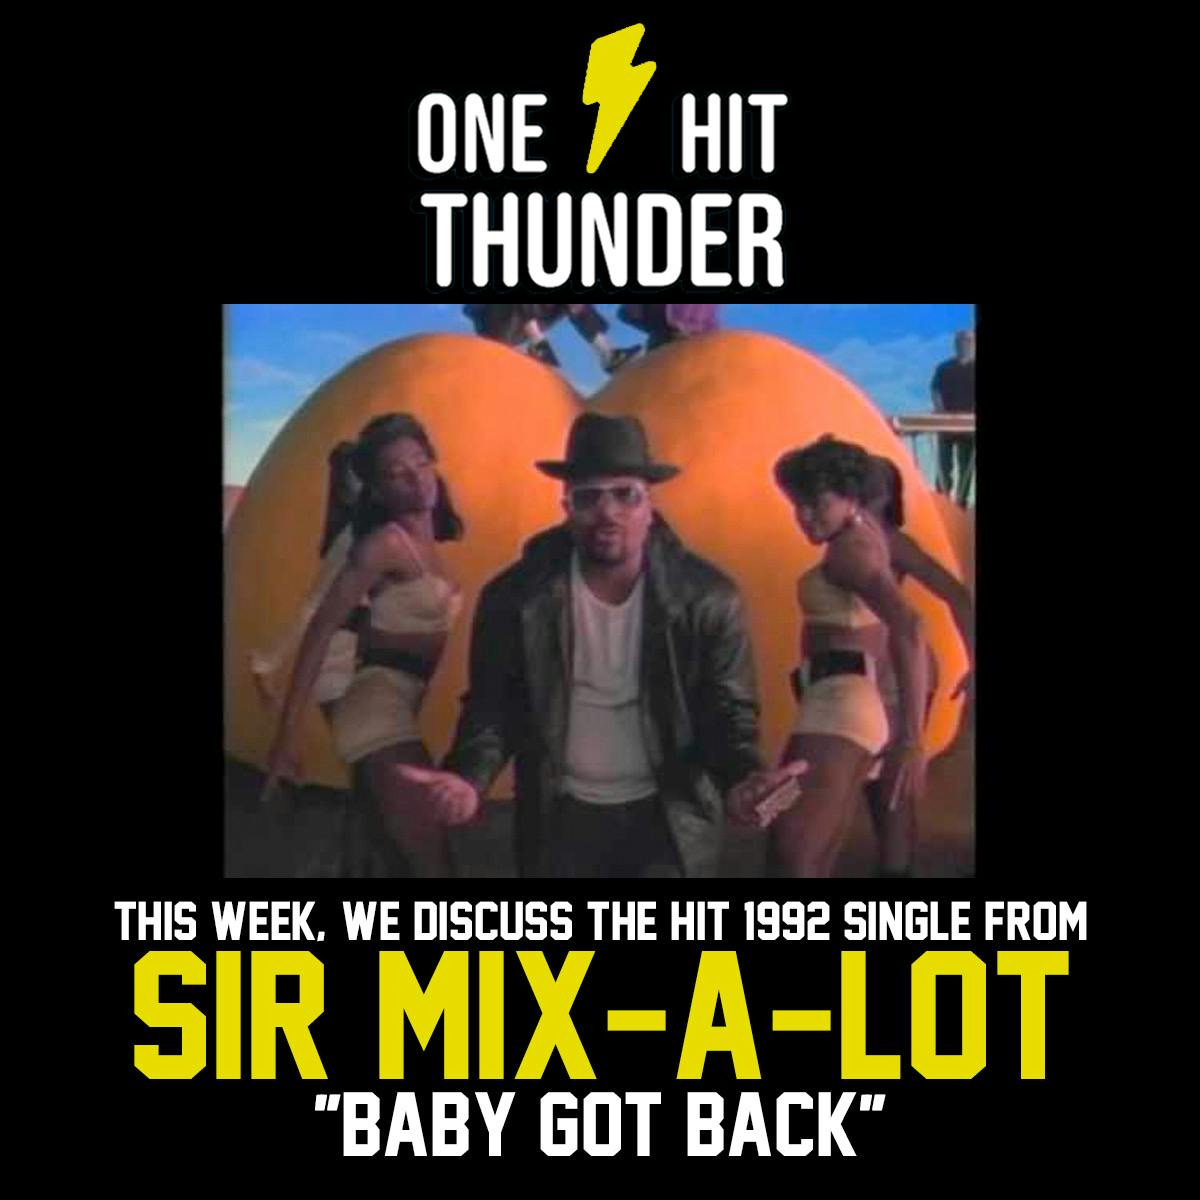 ”Baby Got Back” by Sir Mix-A-Lot